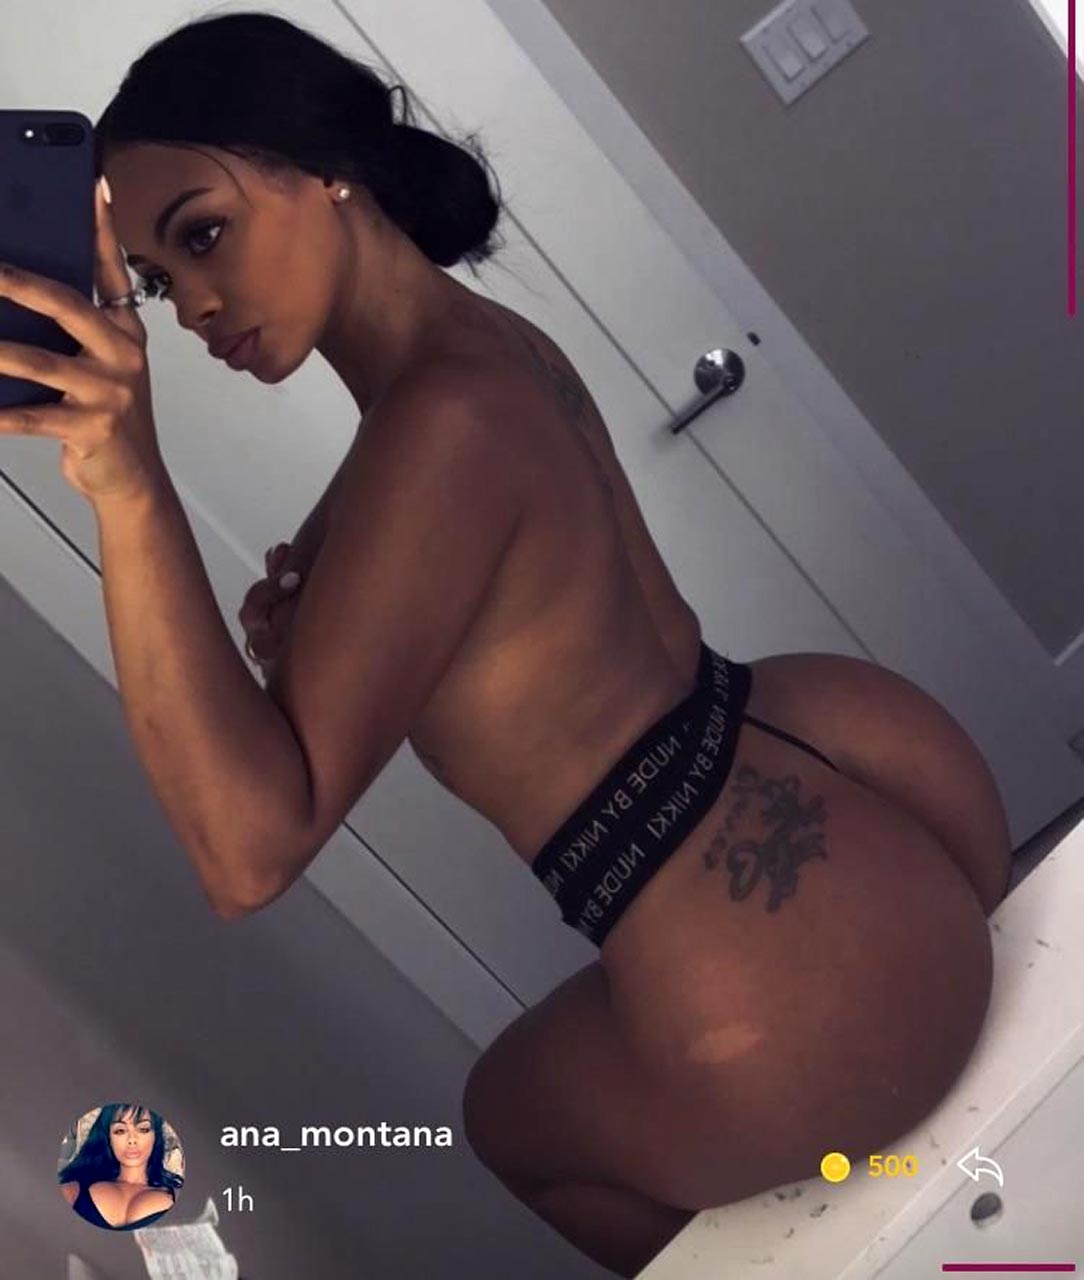 Leaked Pics And Ana Montana Porn Video nude pic, download photos Analicia C...